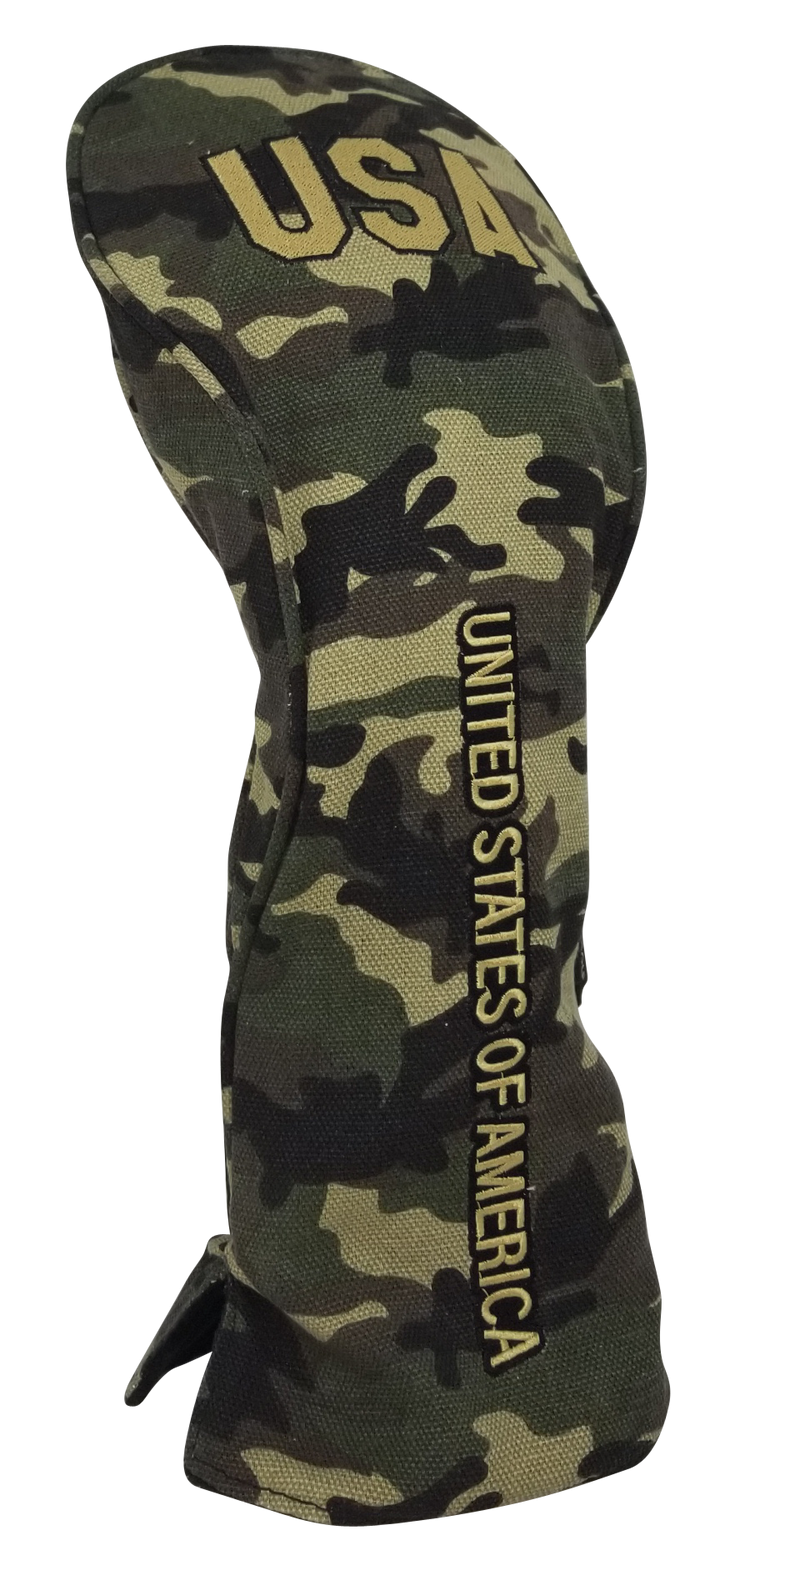 USA Military Camo Embroidered Headcover by ReadyGOLF - Driver